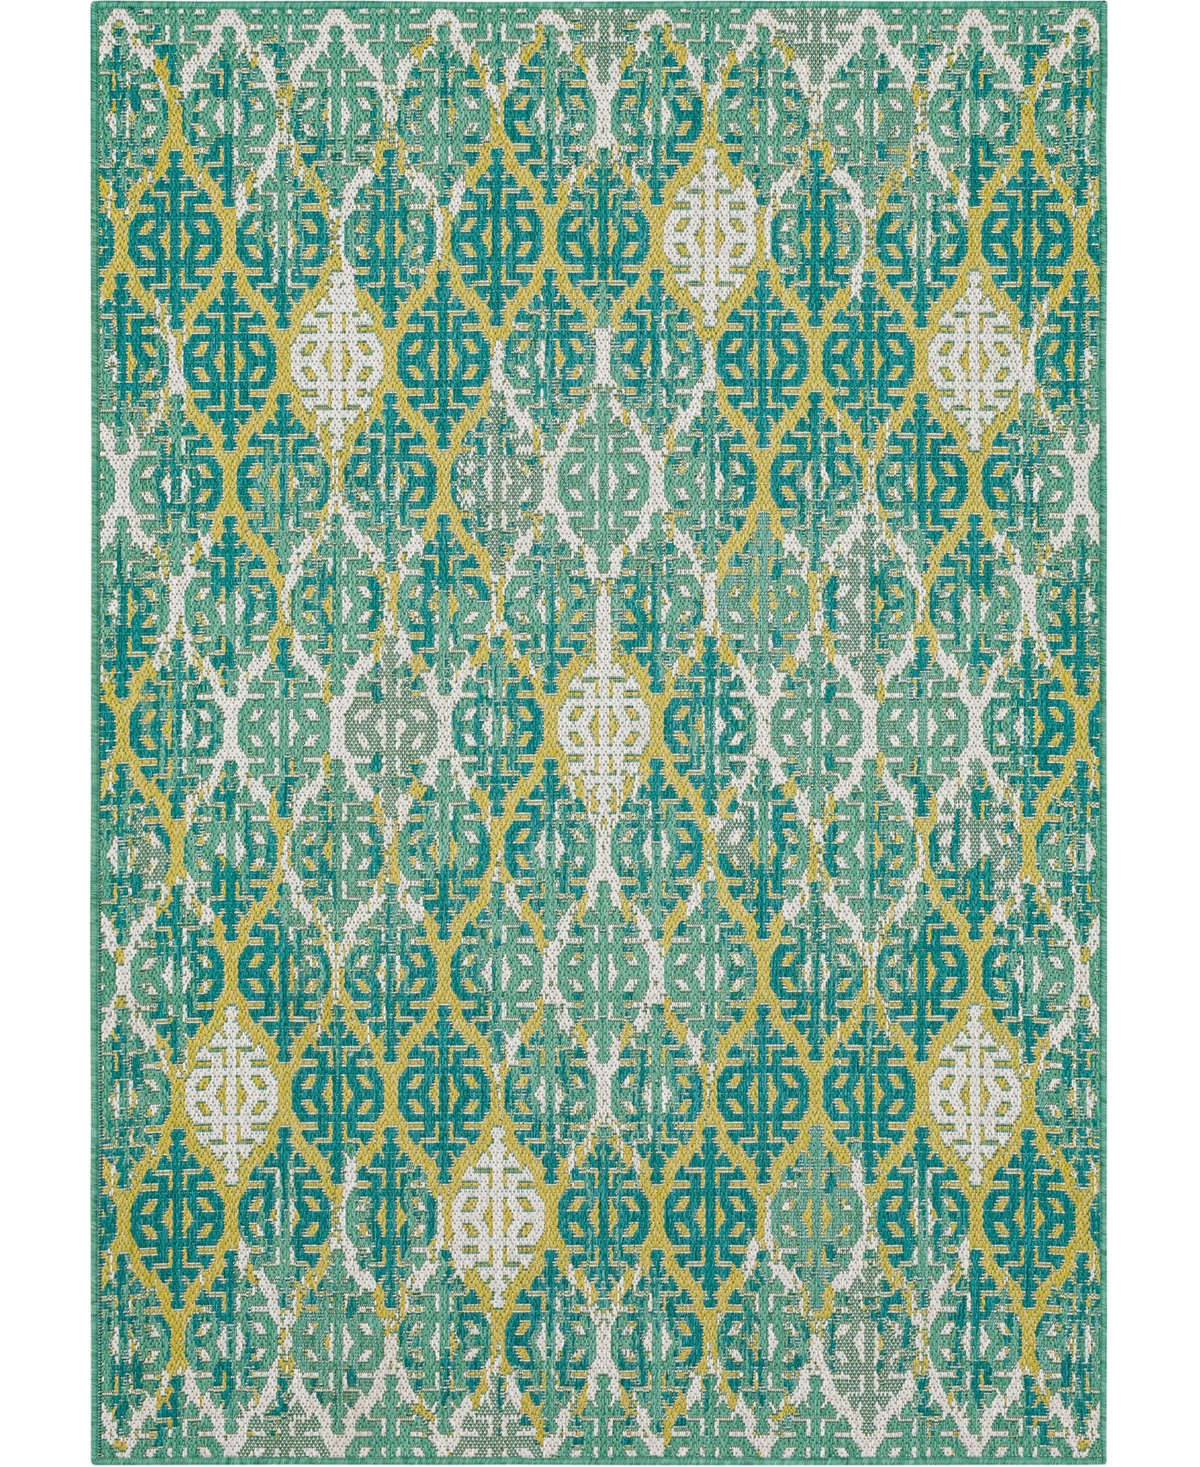 Mohawk Malibu Outdoor Stamped Ikat 4' X 5'6" Area Rug In Teal